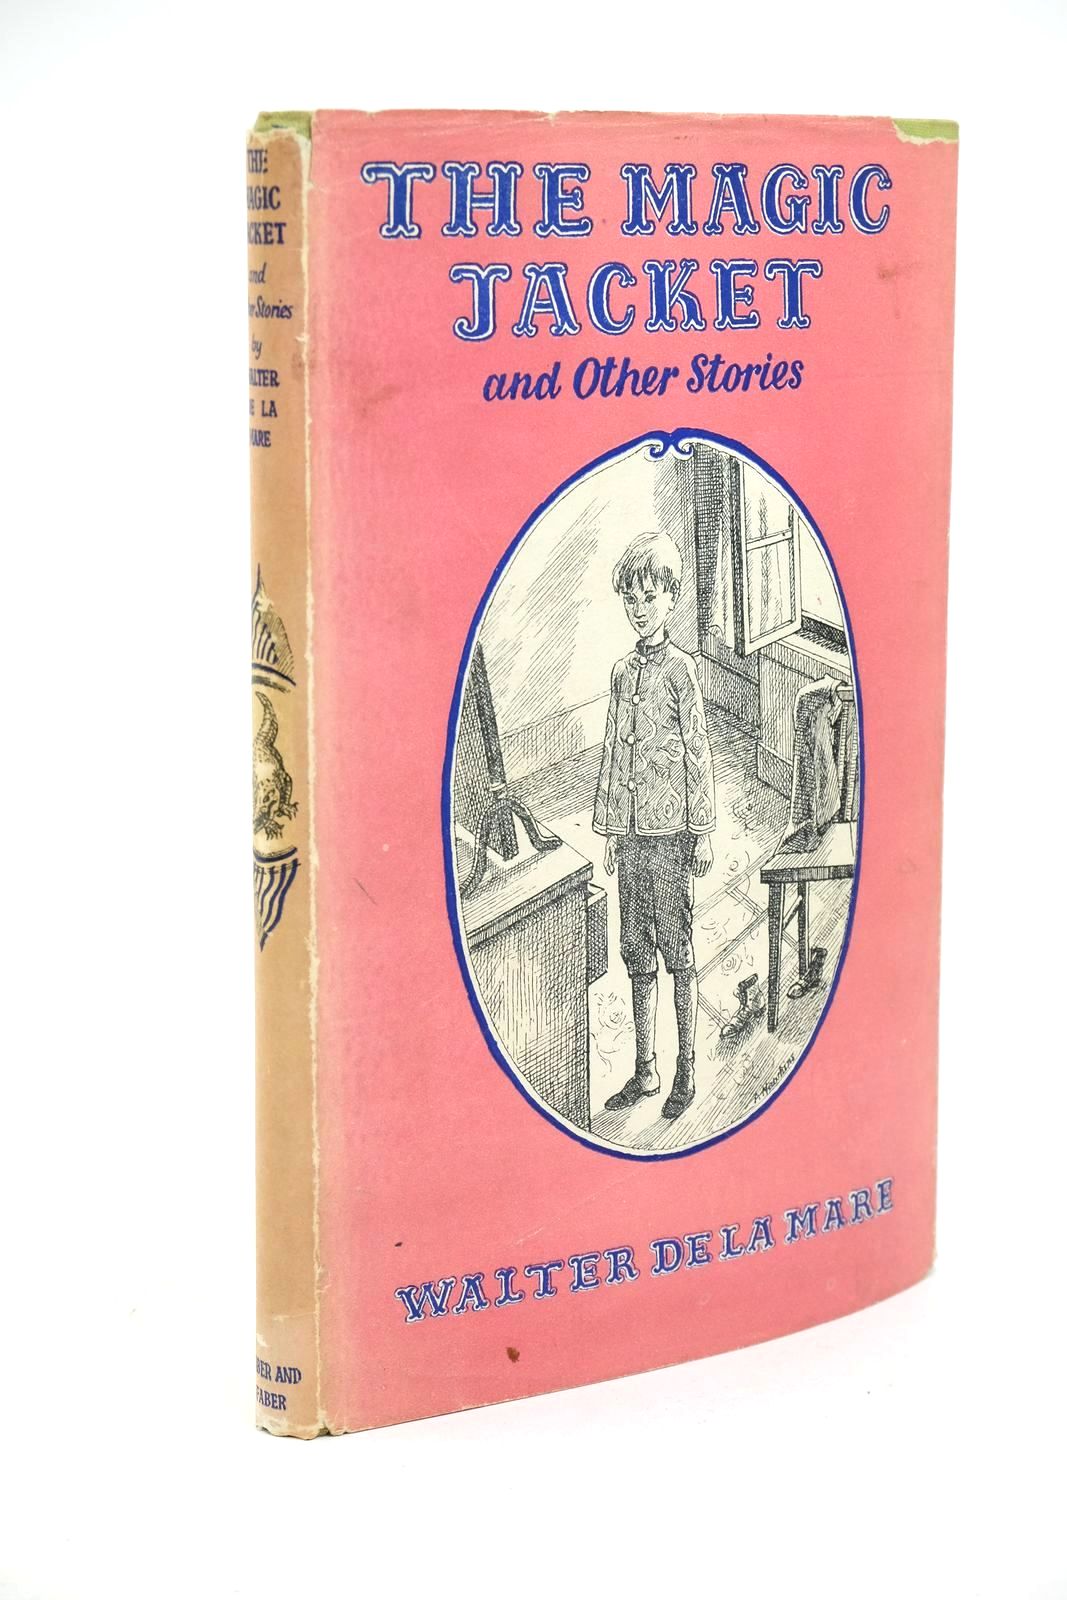 Photo of THE MAGIC JACKET & OTHER STORIES written by De La Mare, Walter illustrated by Hawkins, Irene published by Faber &amp; Faber (STOCK CODE: 1322910)  for sale by Stella & Rose's Books